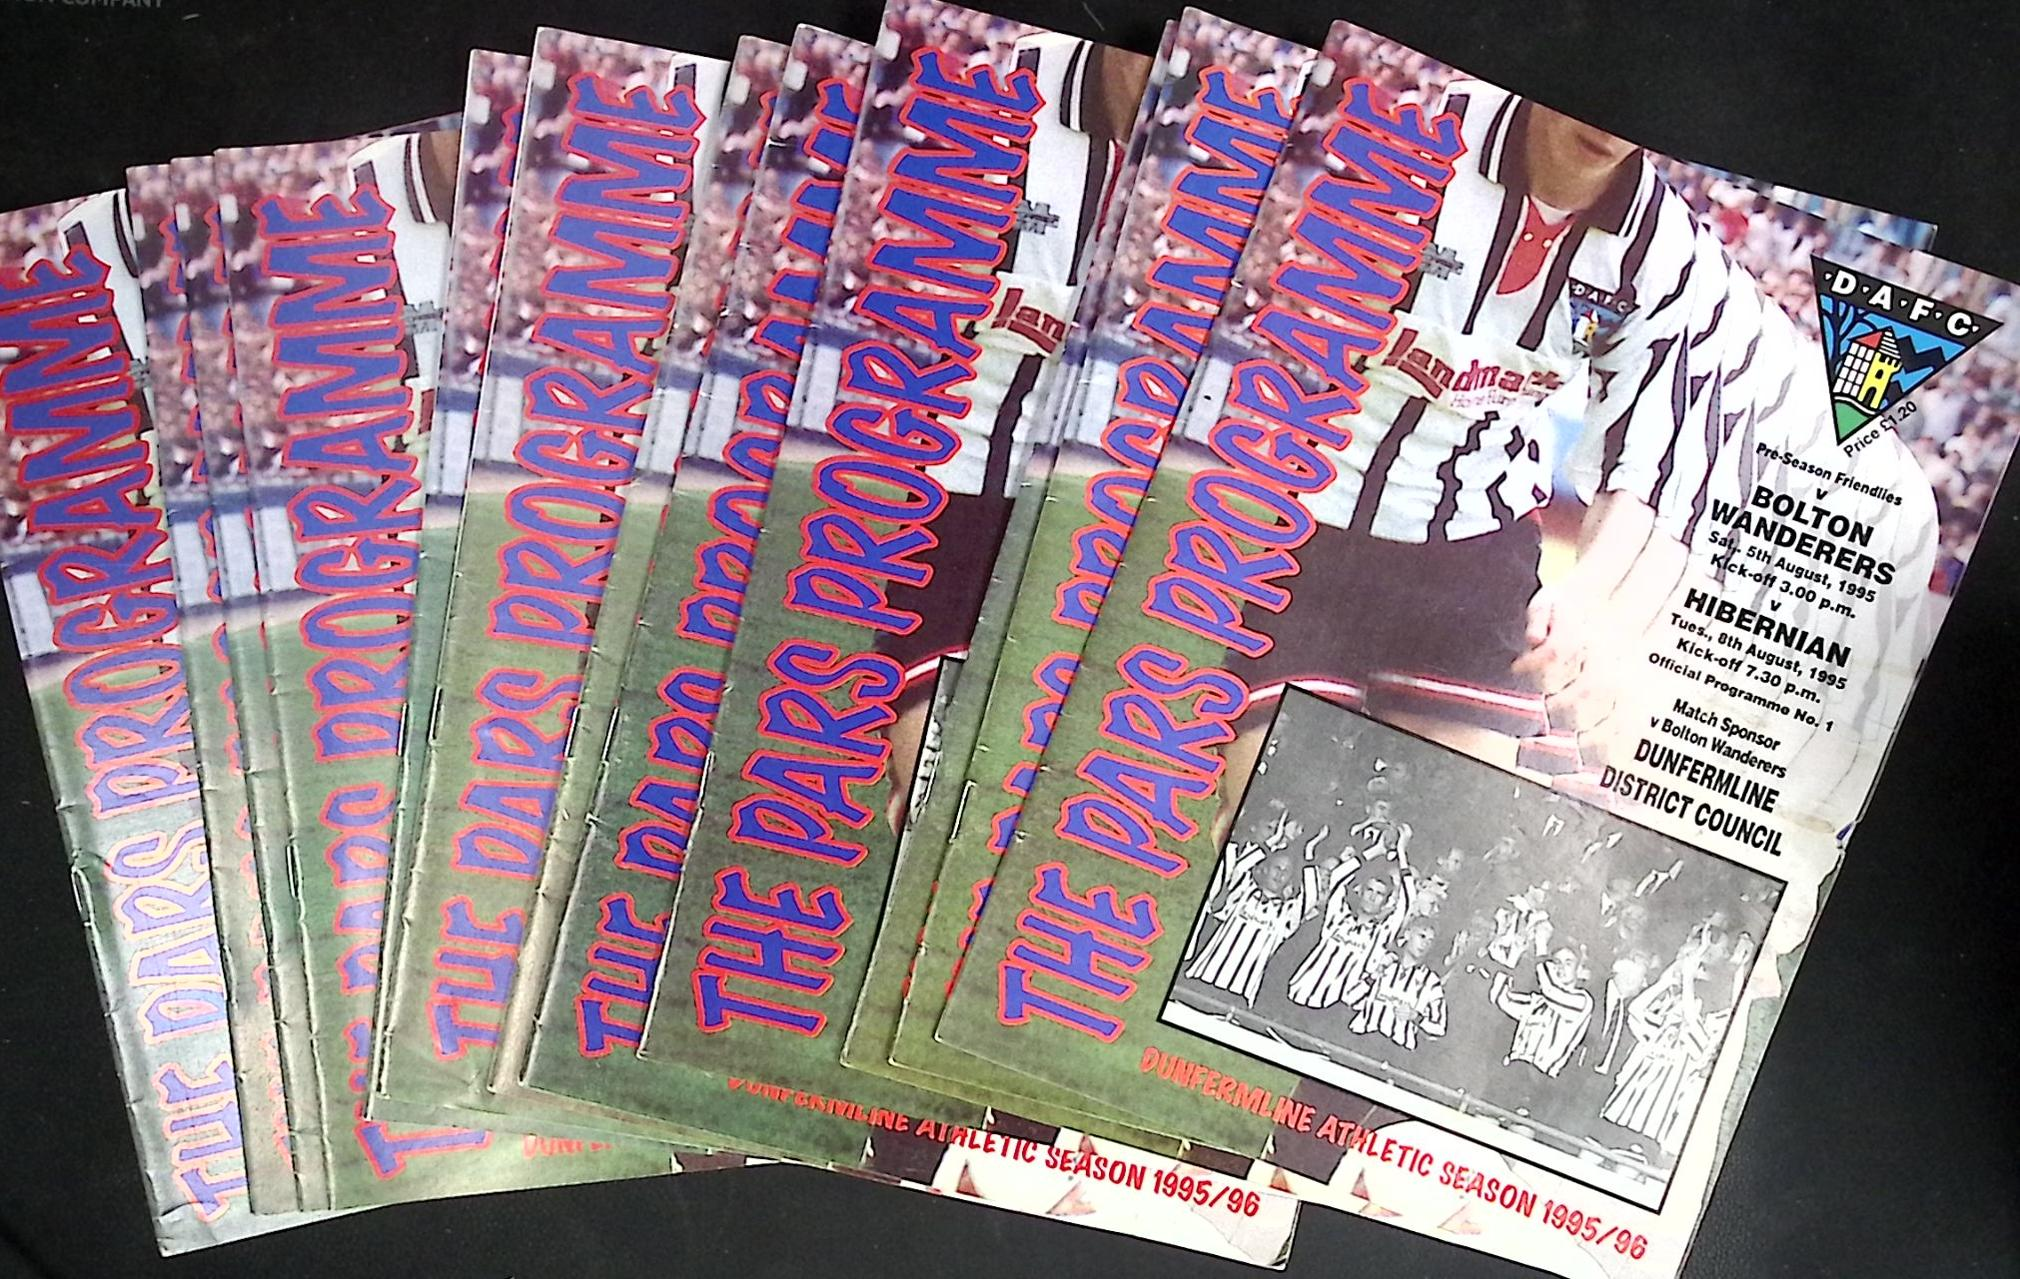 Dunfermline Athletic Football Programmes. The Pars. 1995-96 Season.  12 issues.